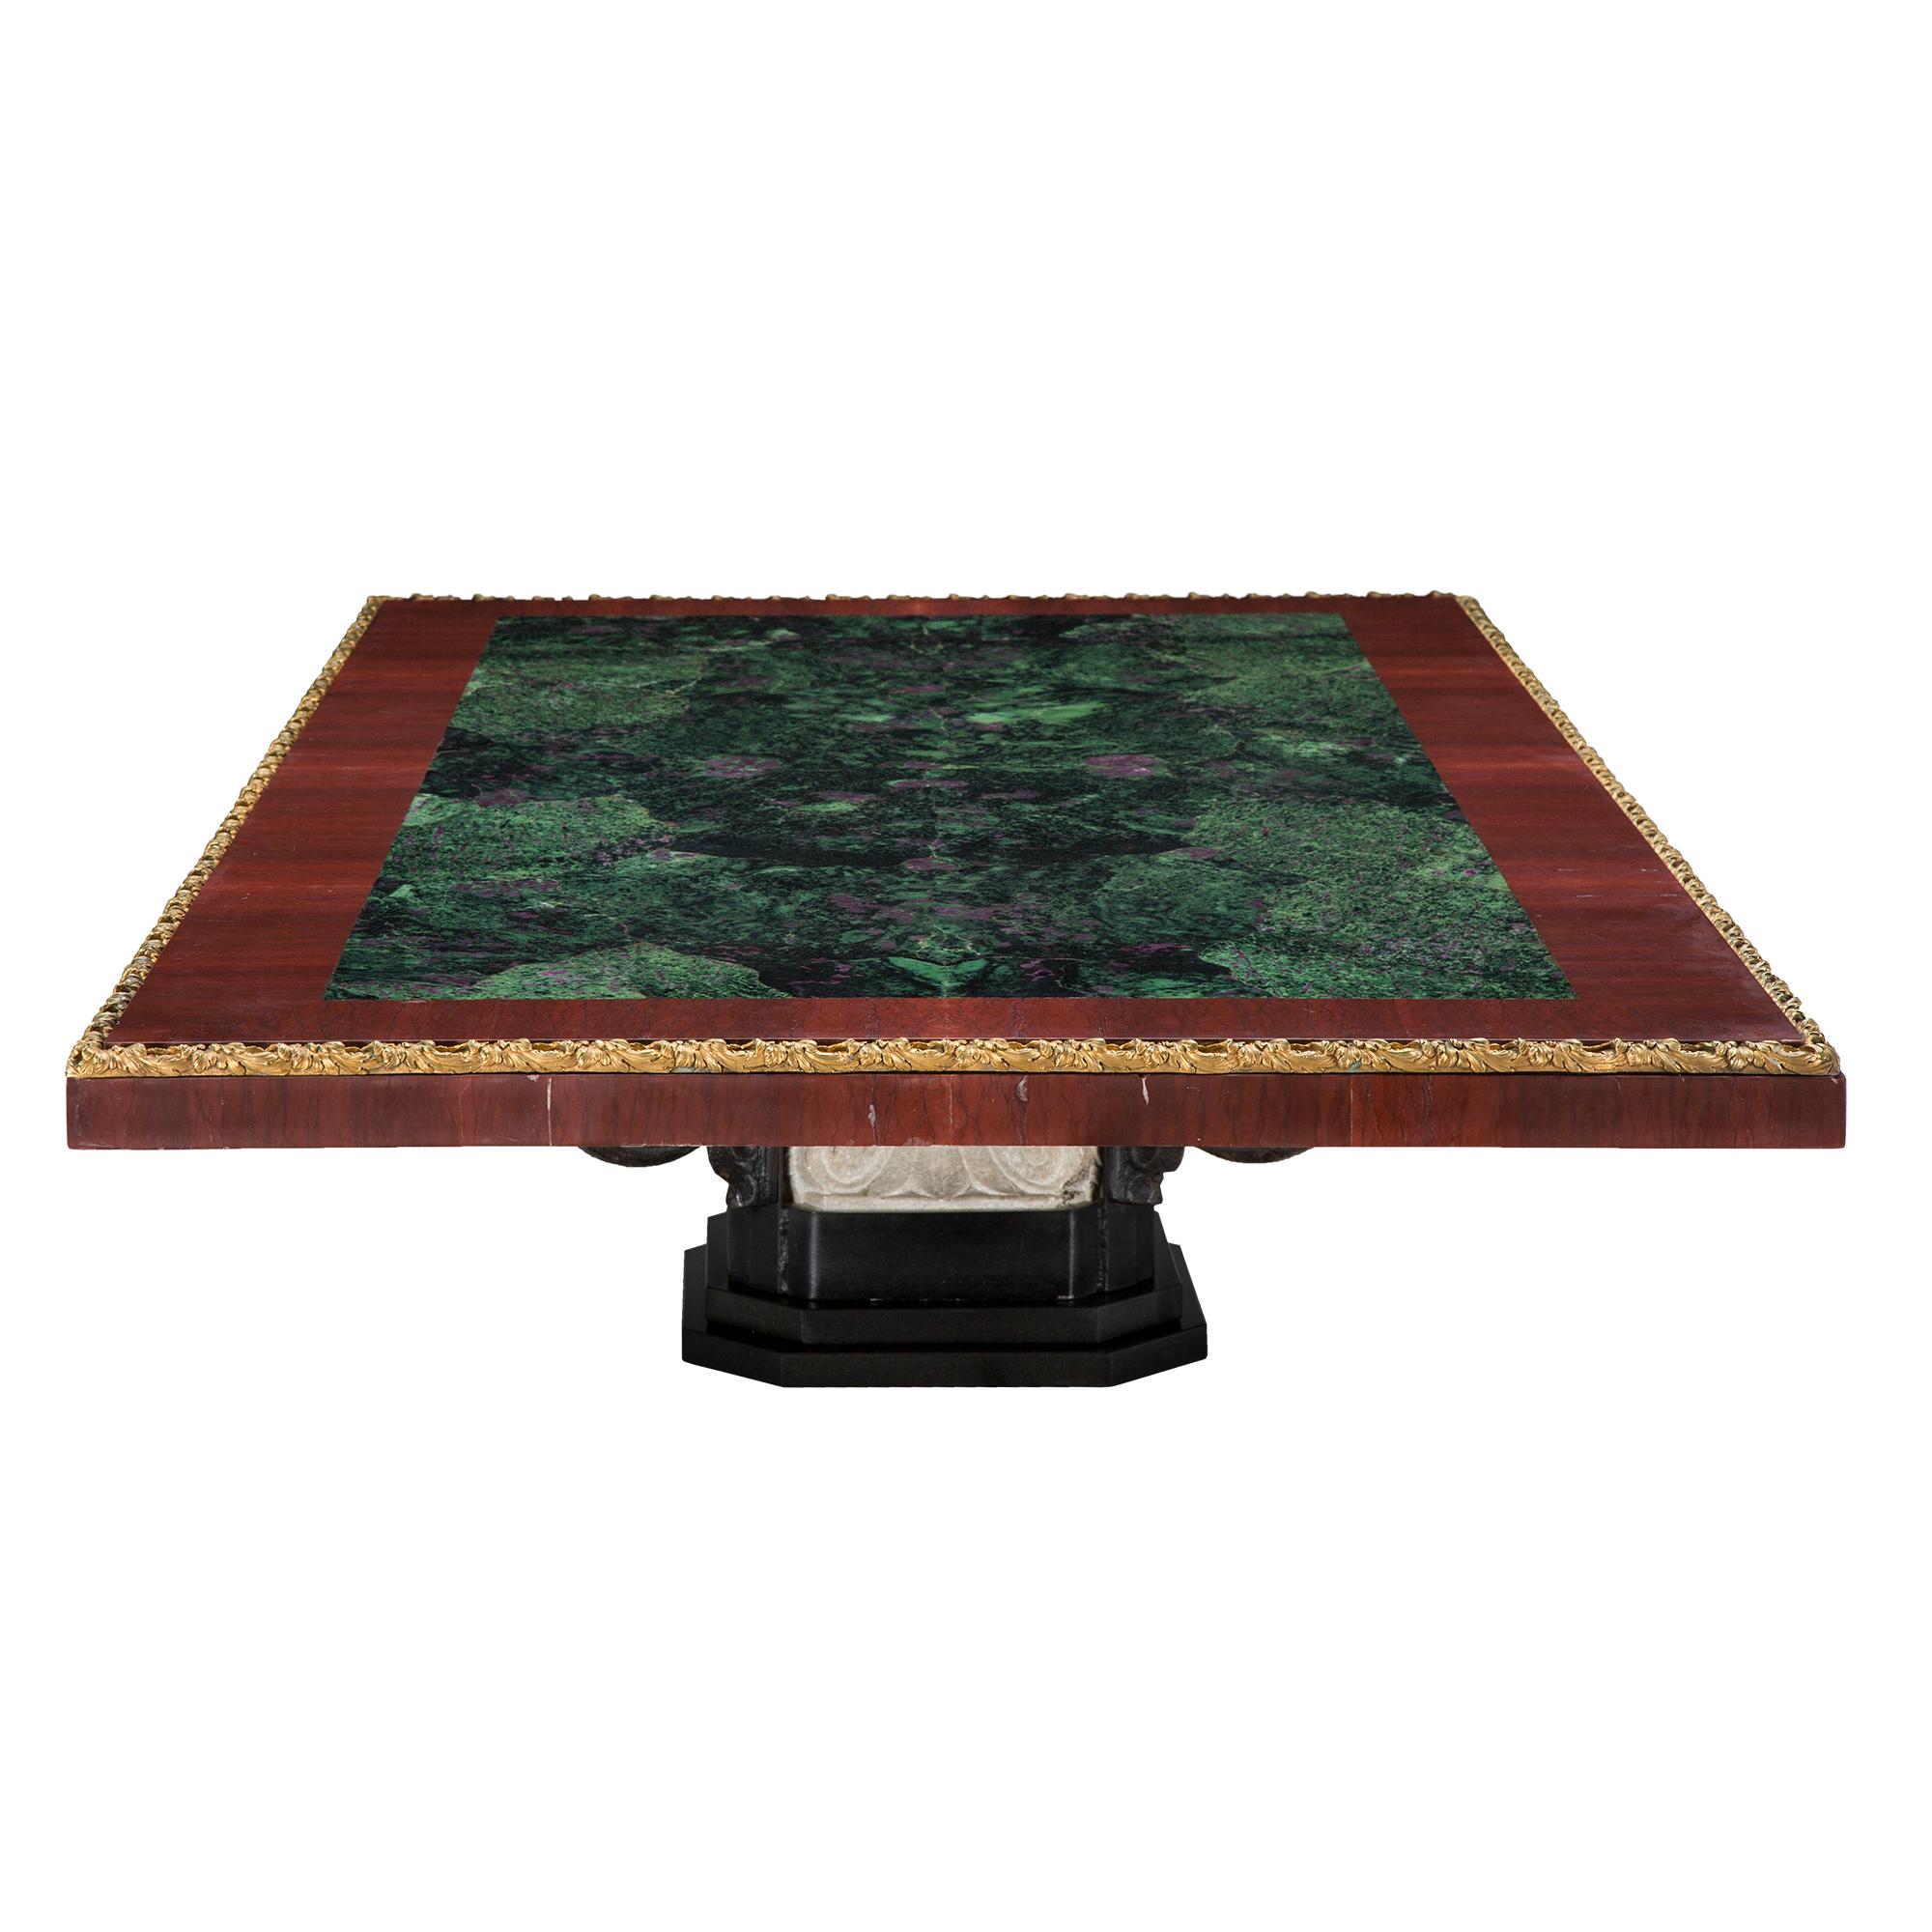 Italian 19th Century Marble, Wrought Iron and Ormolu Coffee Table In Good Condition For Sale In West Palm Beach, FL